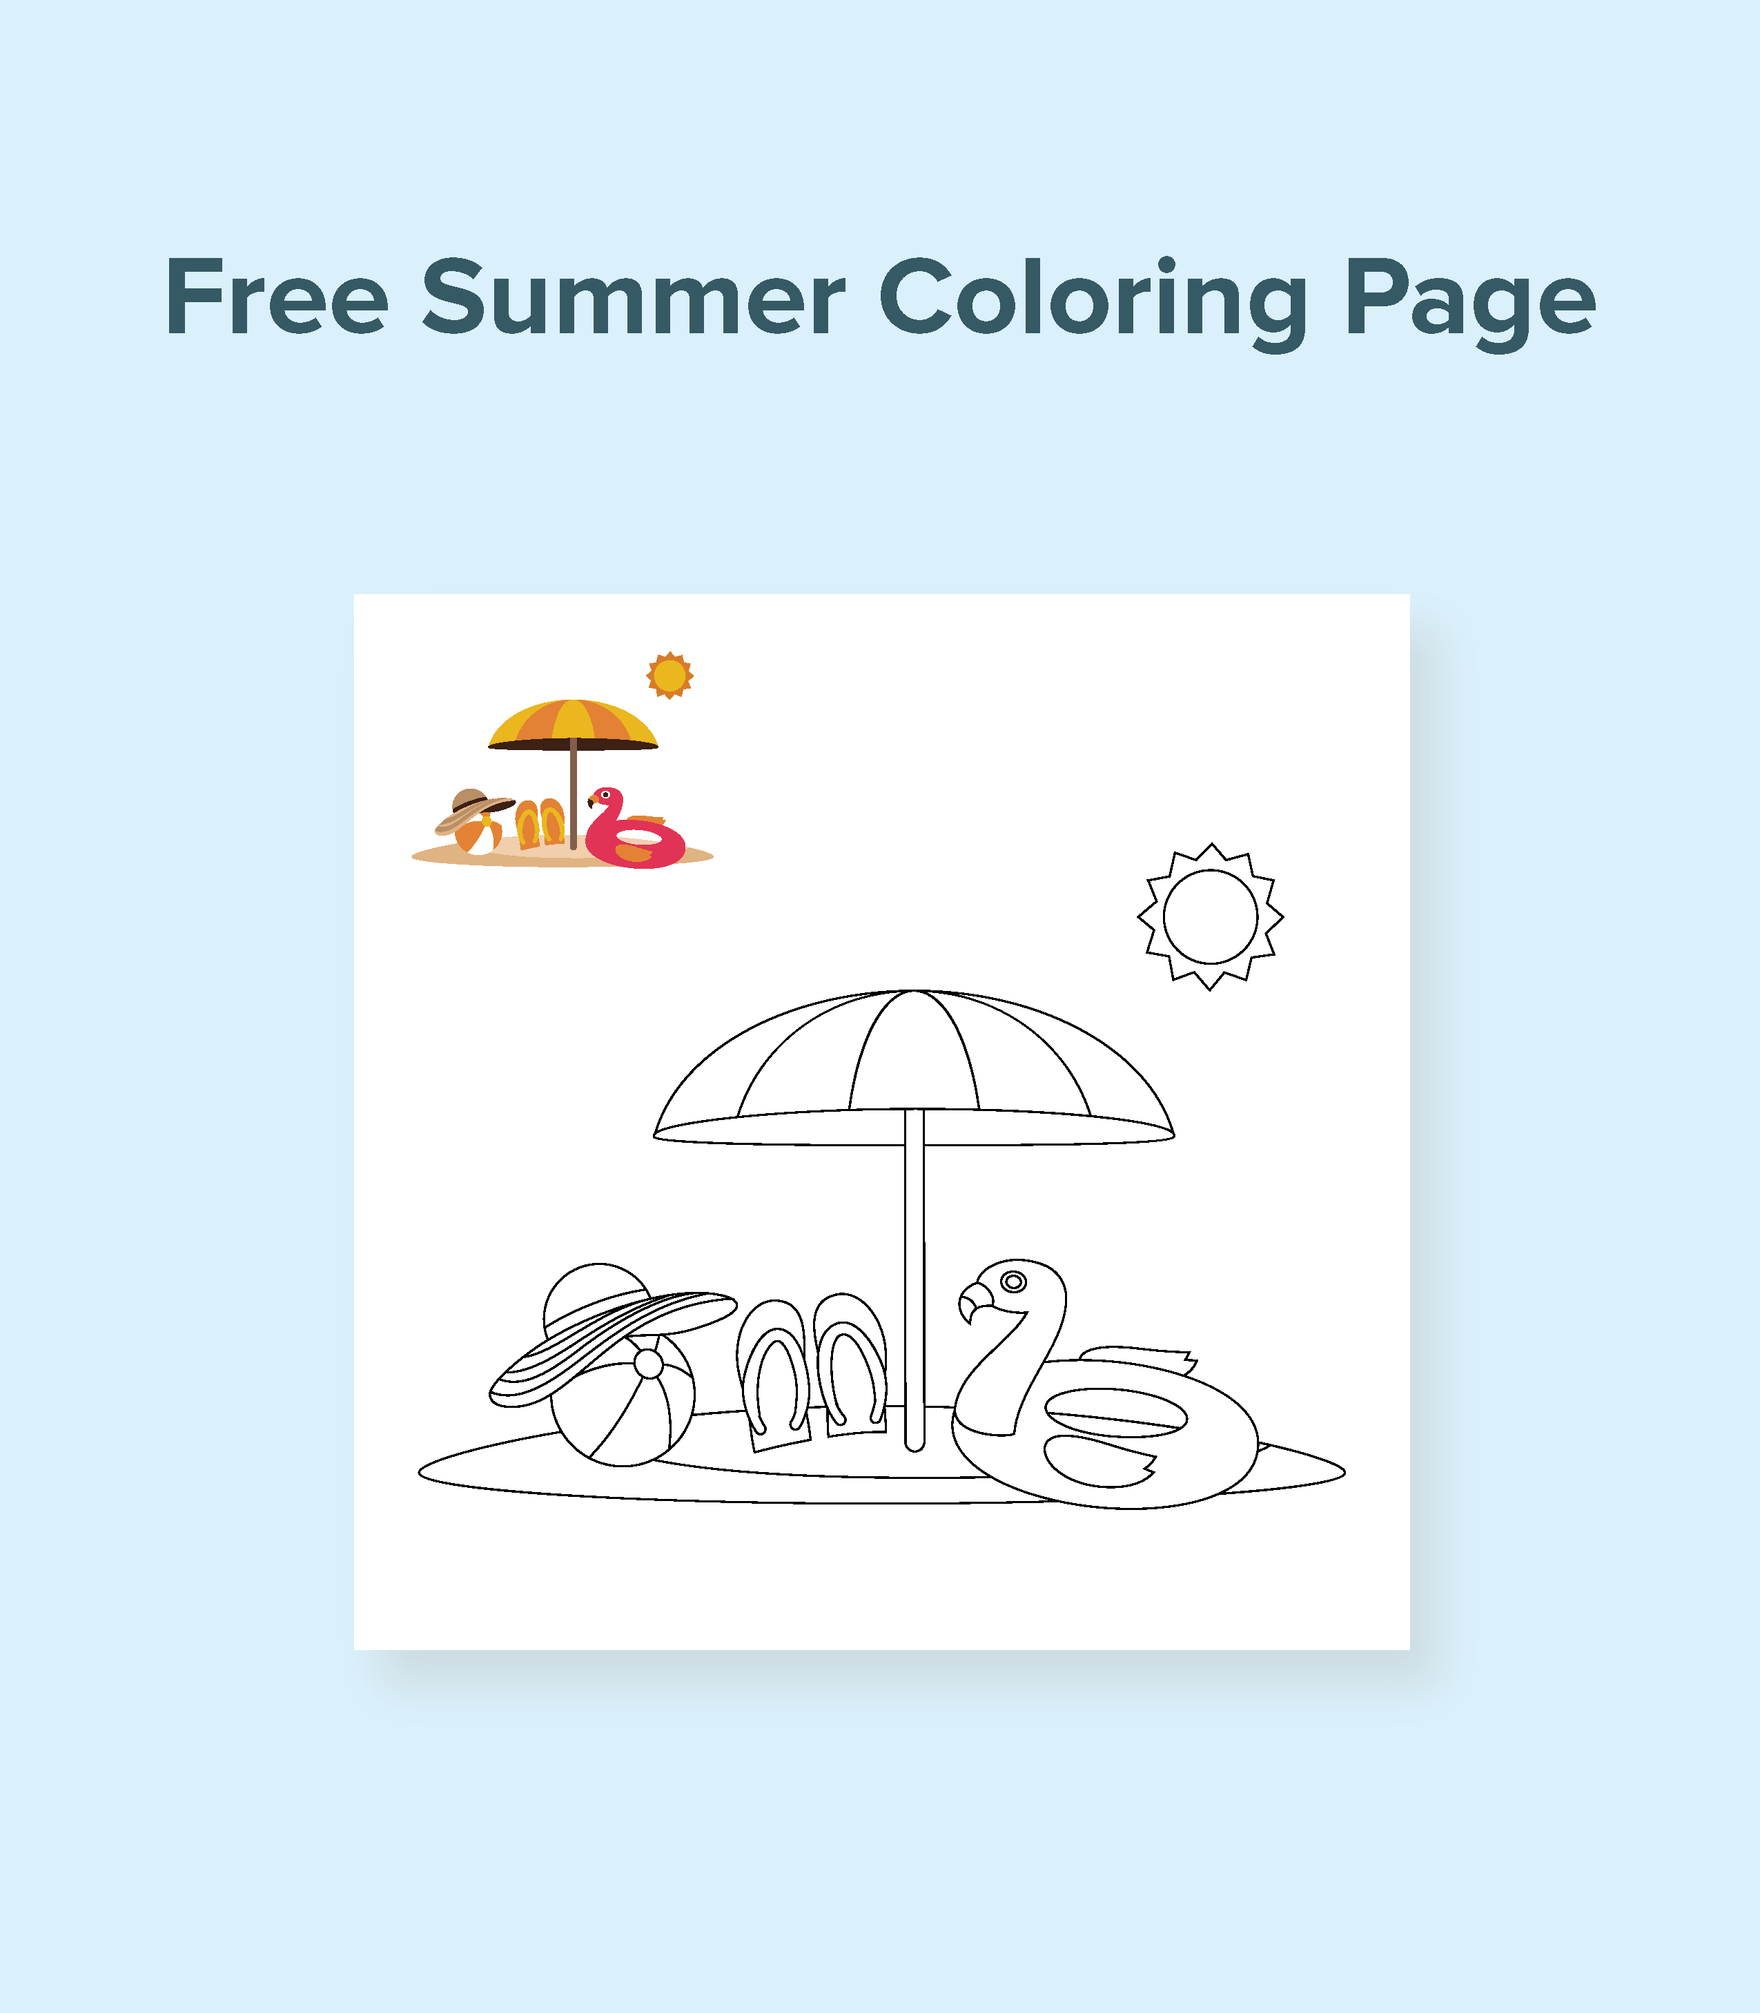 Free Summer Coloring Page in Illustrator, PSD, EPS, SVG, JPG, PNG